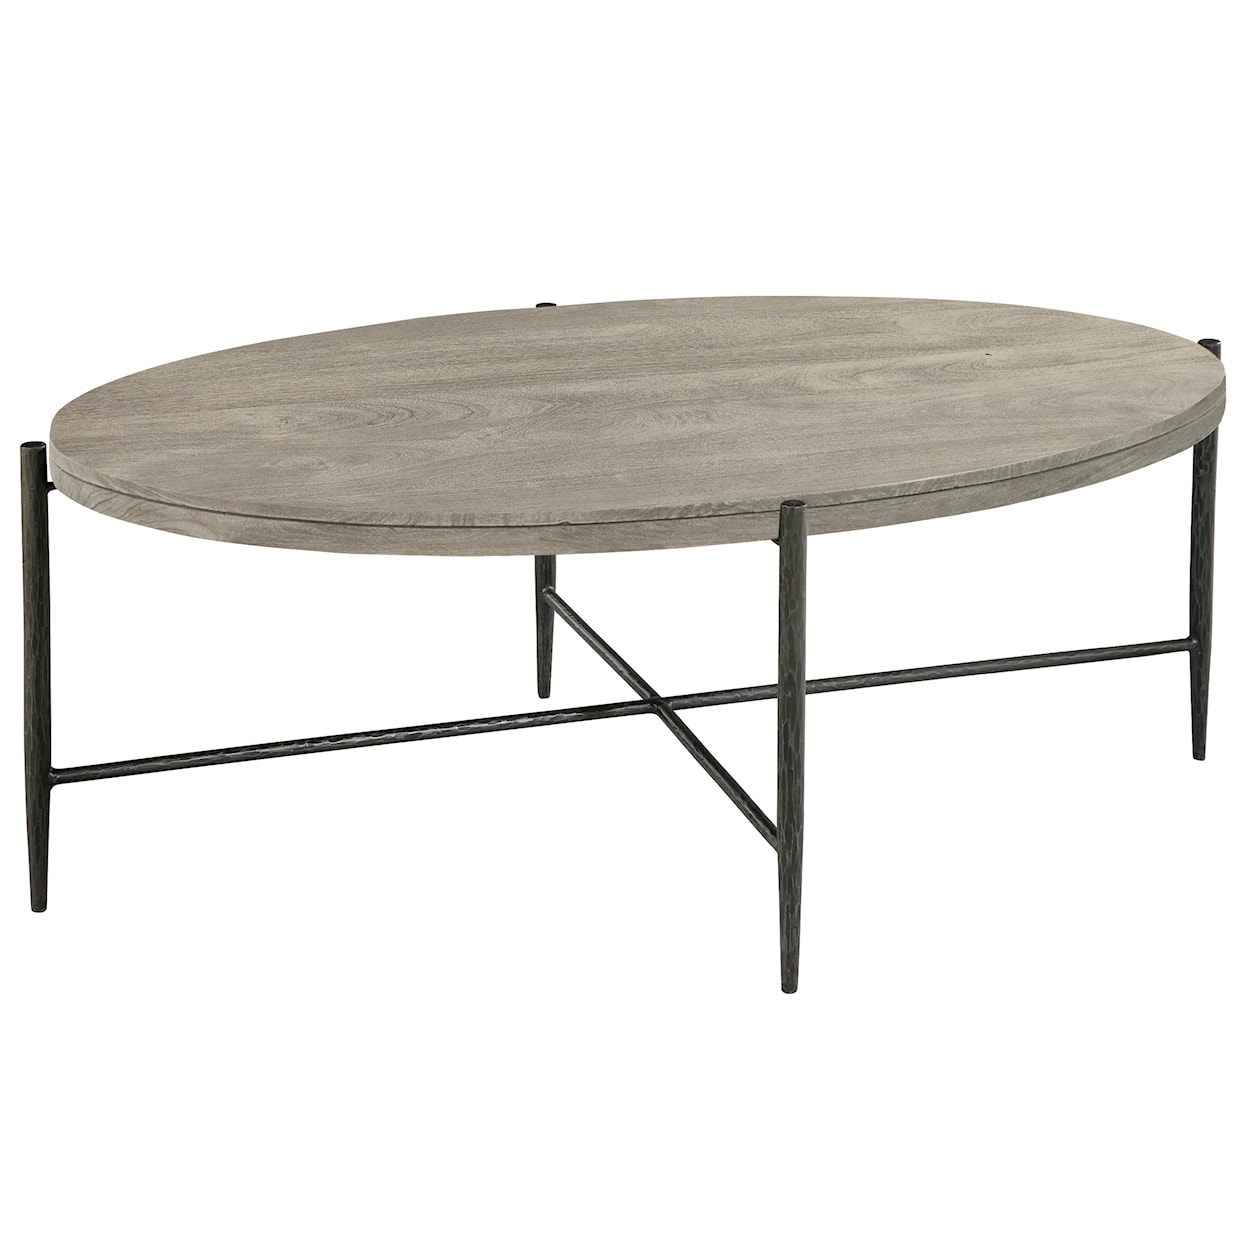 Hekman Bedford Park Oval Coffee Table